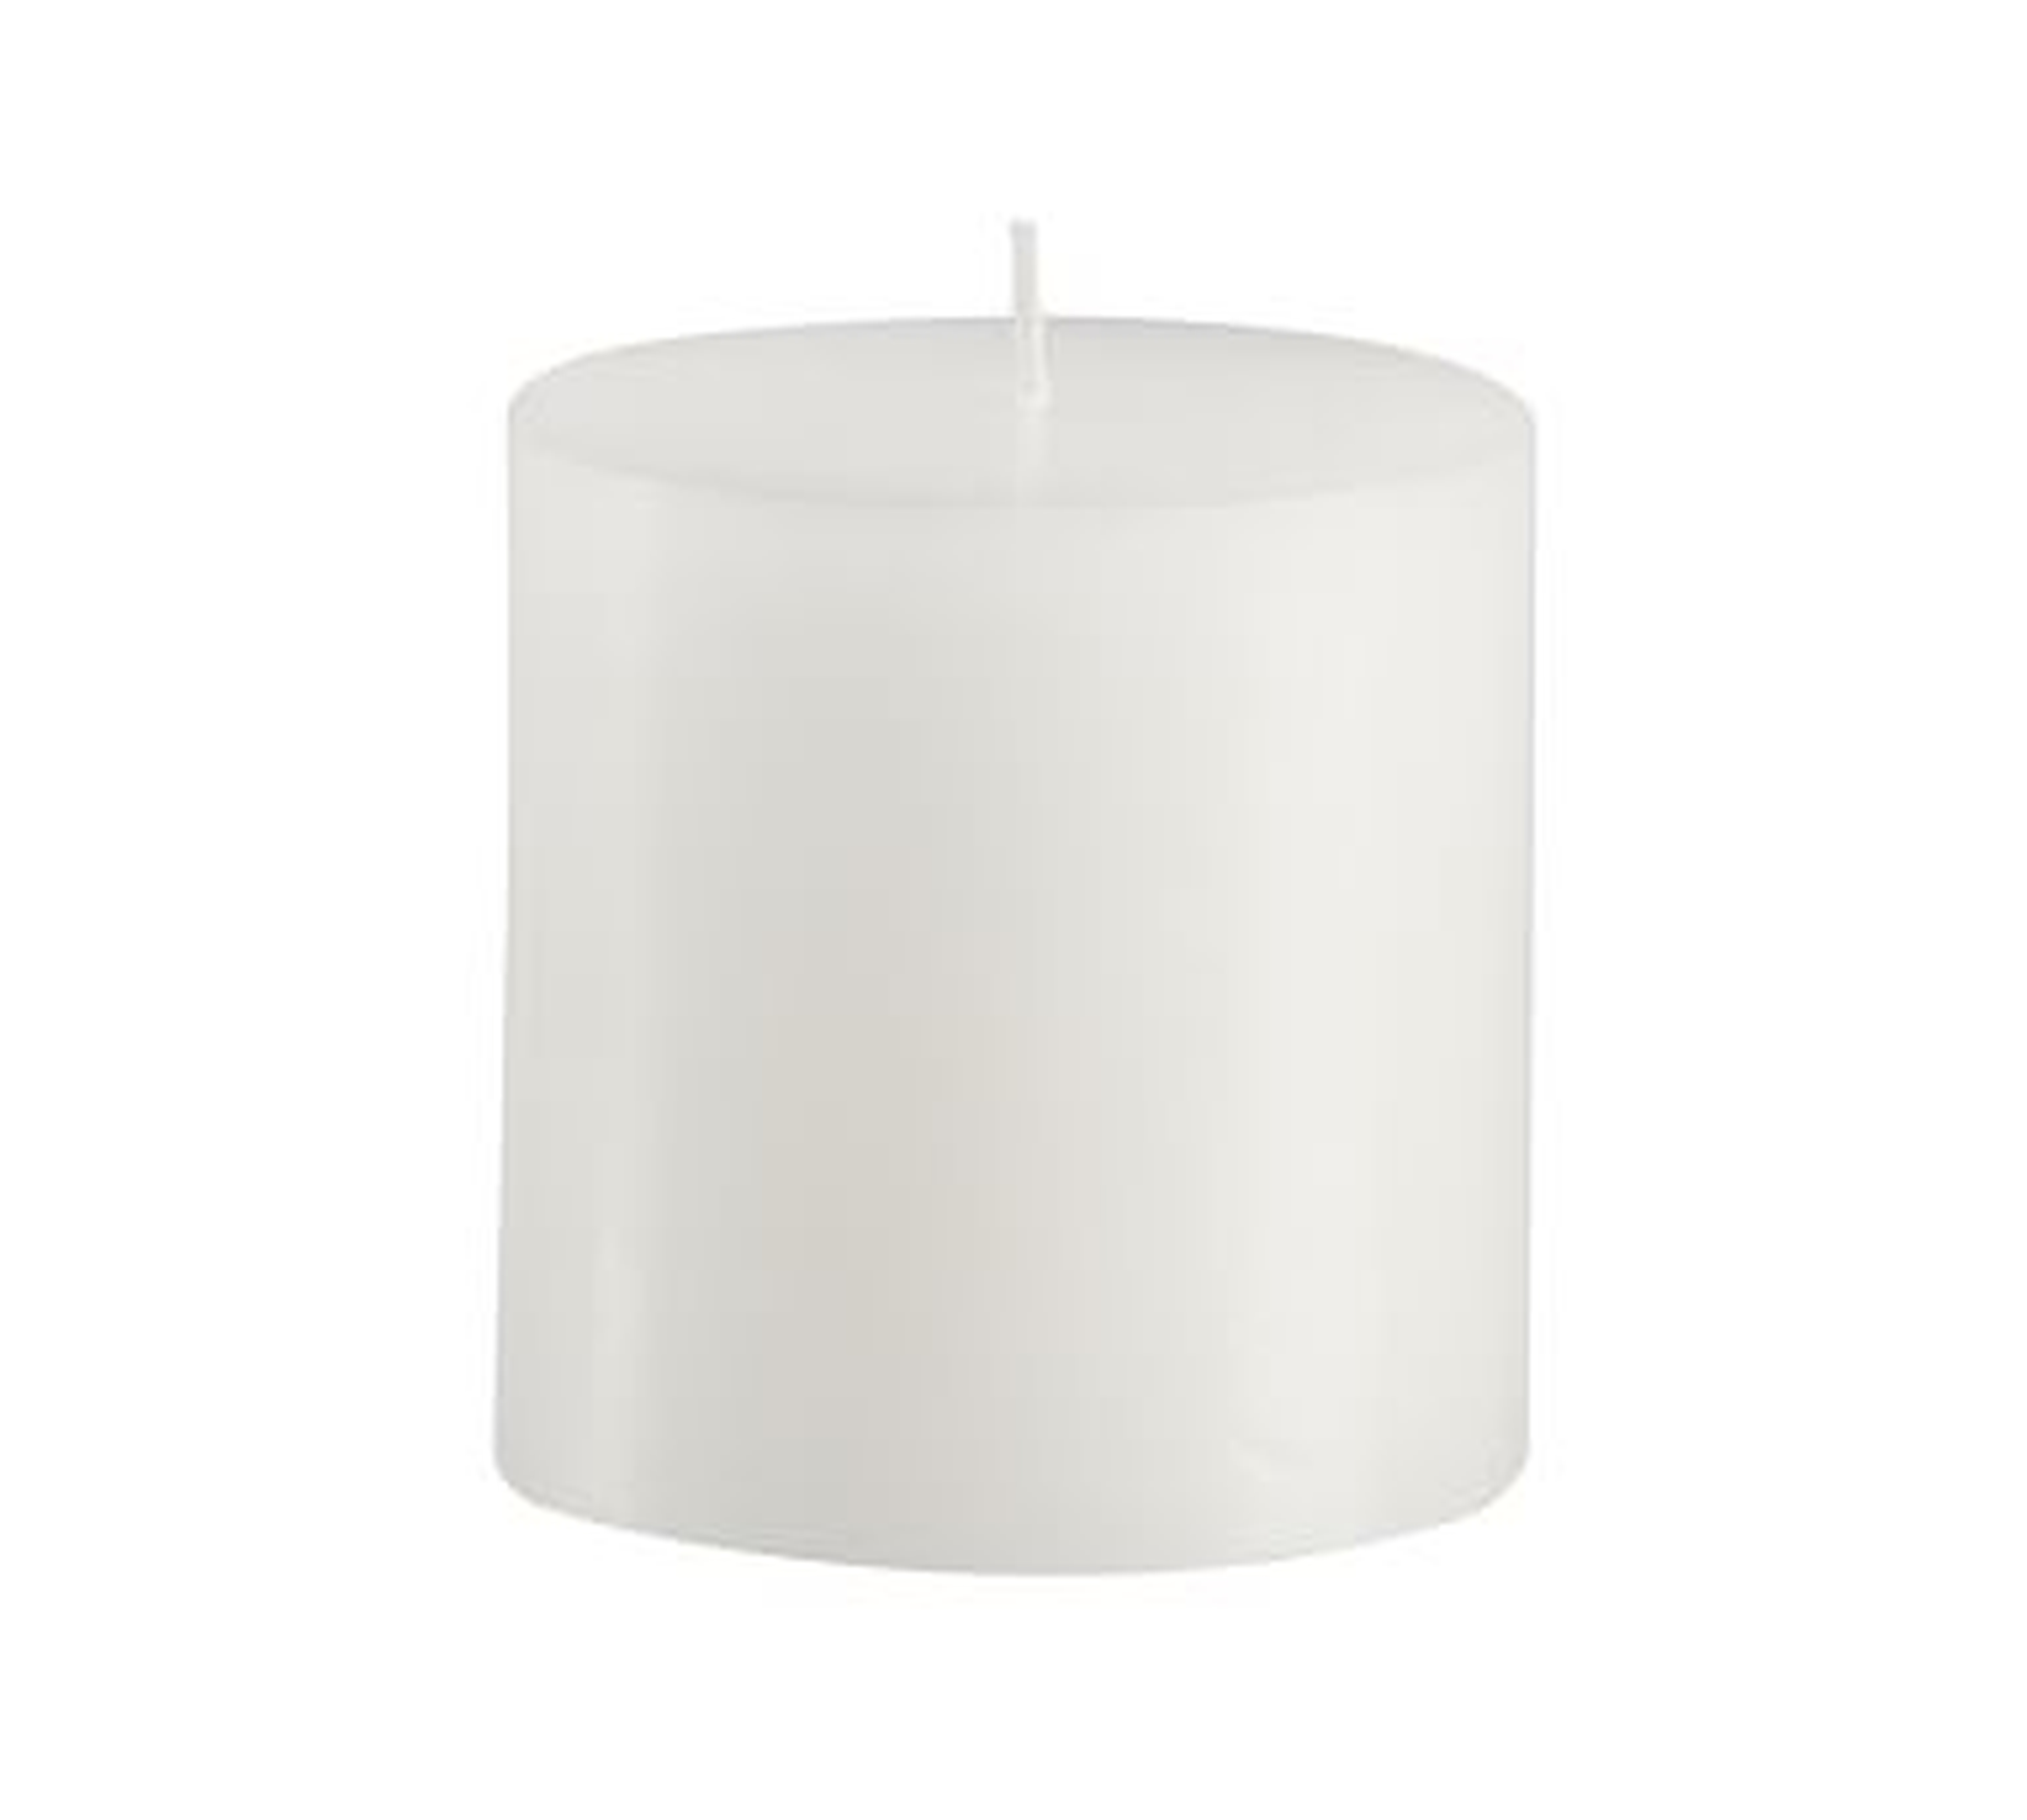 Unscented Wax Pillar Candle, 3"x3" - White - Pottery Barn